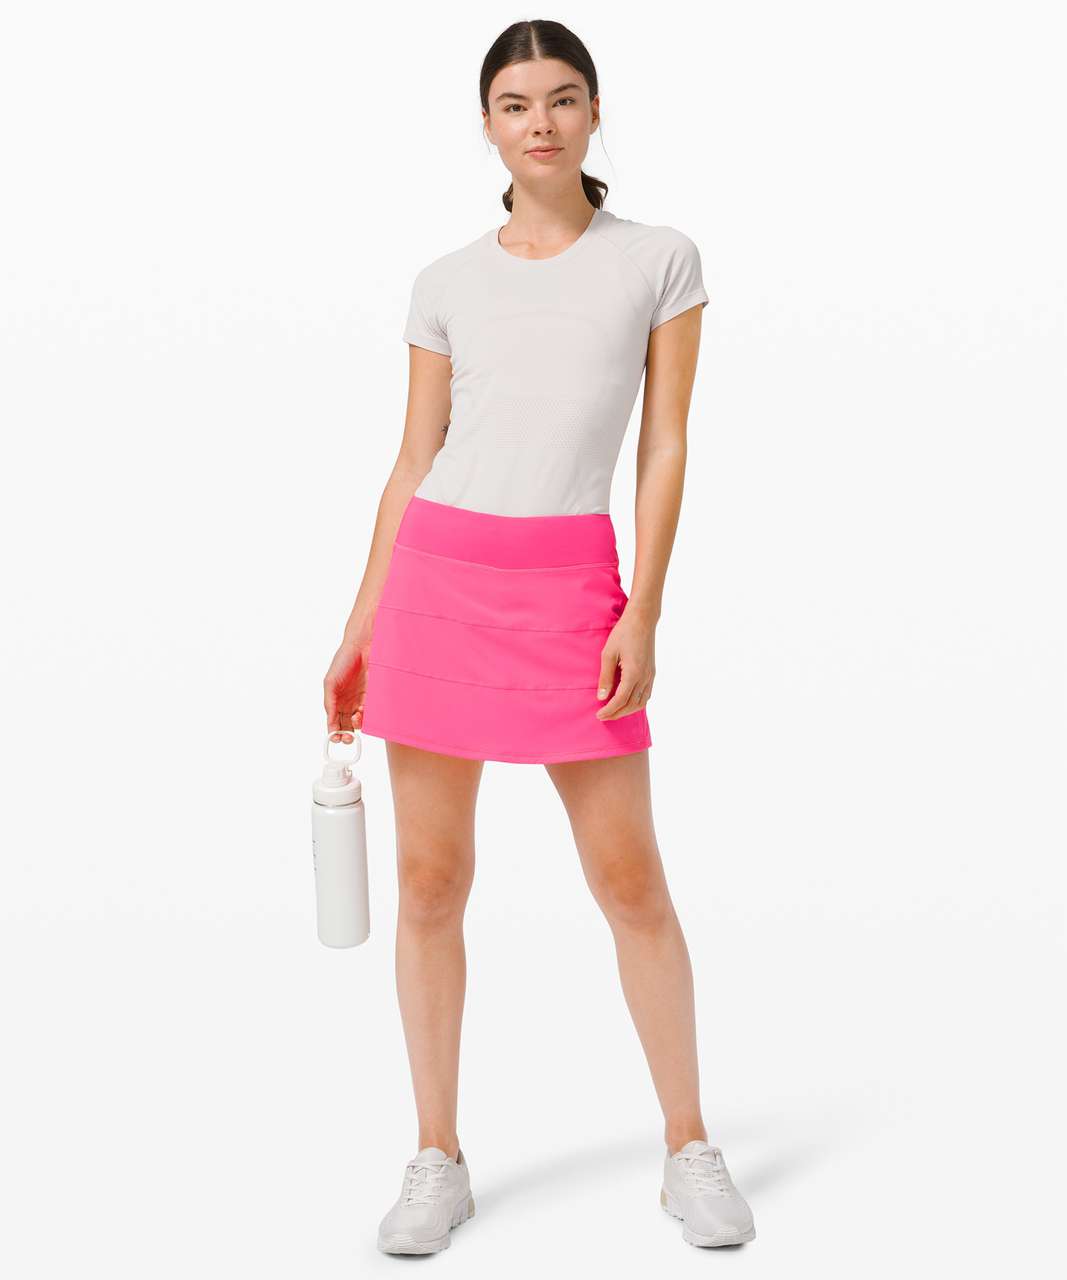 Lululemon Pace Rival Skirt (Tall) *4-way Stretch 15" - Pink Highlight